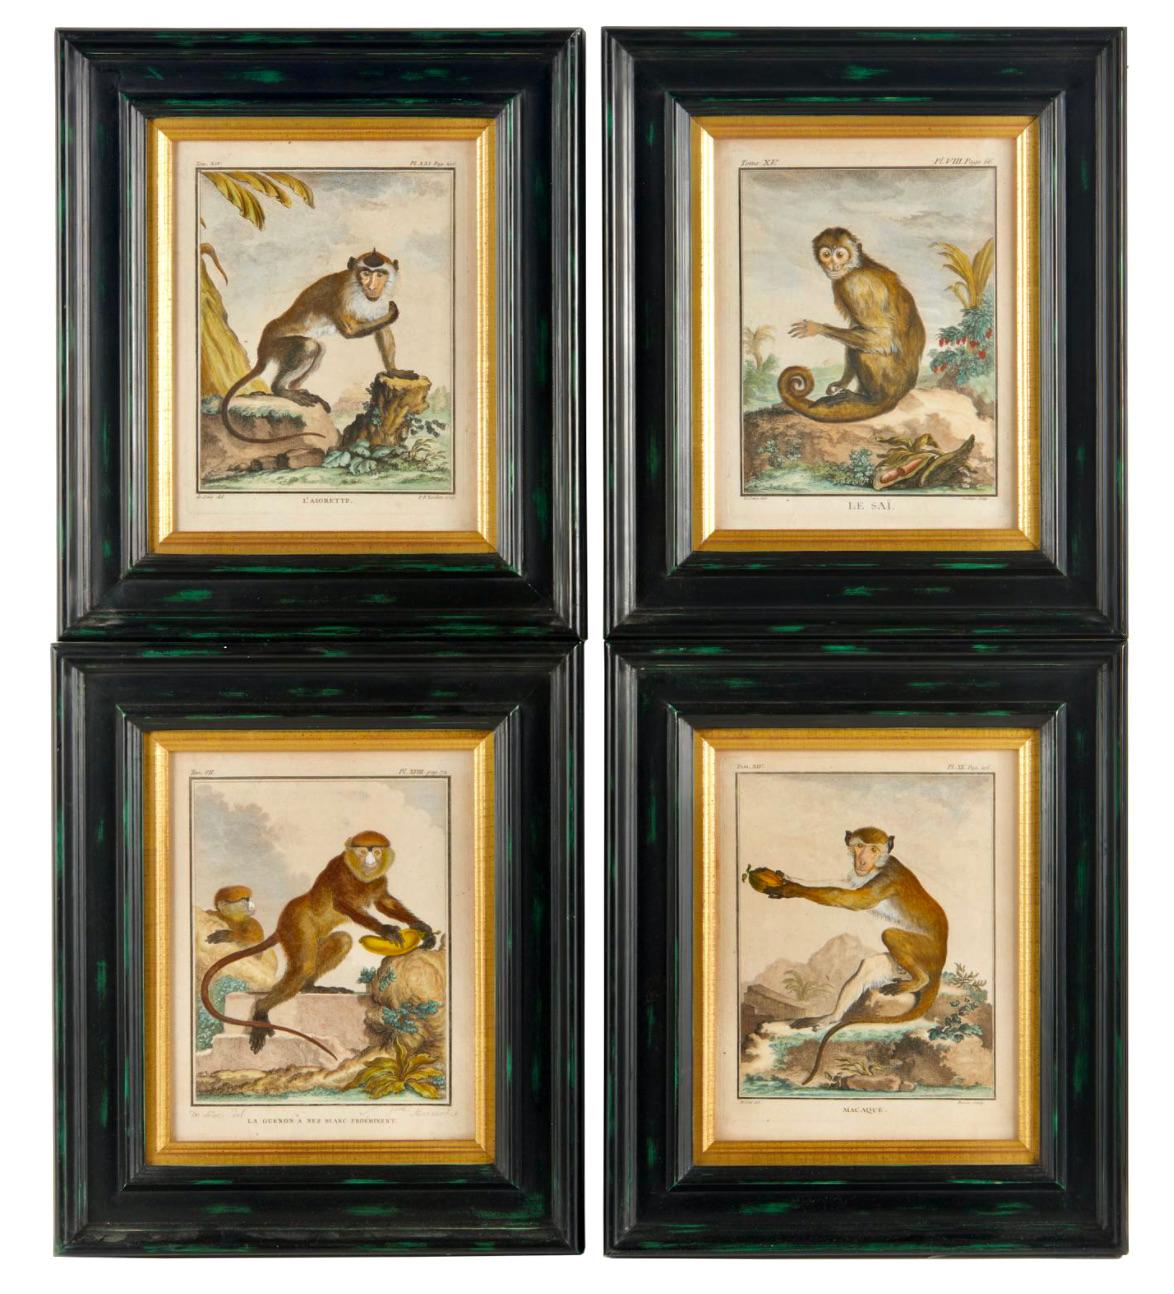 One of four framed Monkey Plates we are offering from the Buffon Comte de Quadrúpedes series by Georges-Louis Leclerc, France – circa 1770.

A copper plate, hand-colored engraving titled, Le Saï, from the “Histoire Naturelle, Generale et